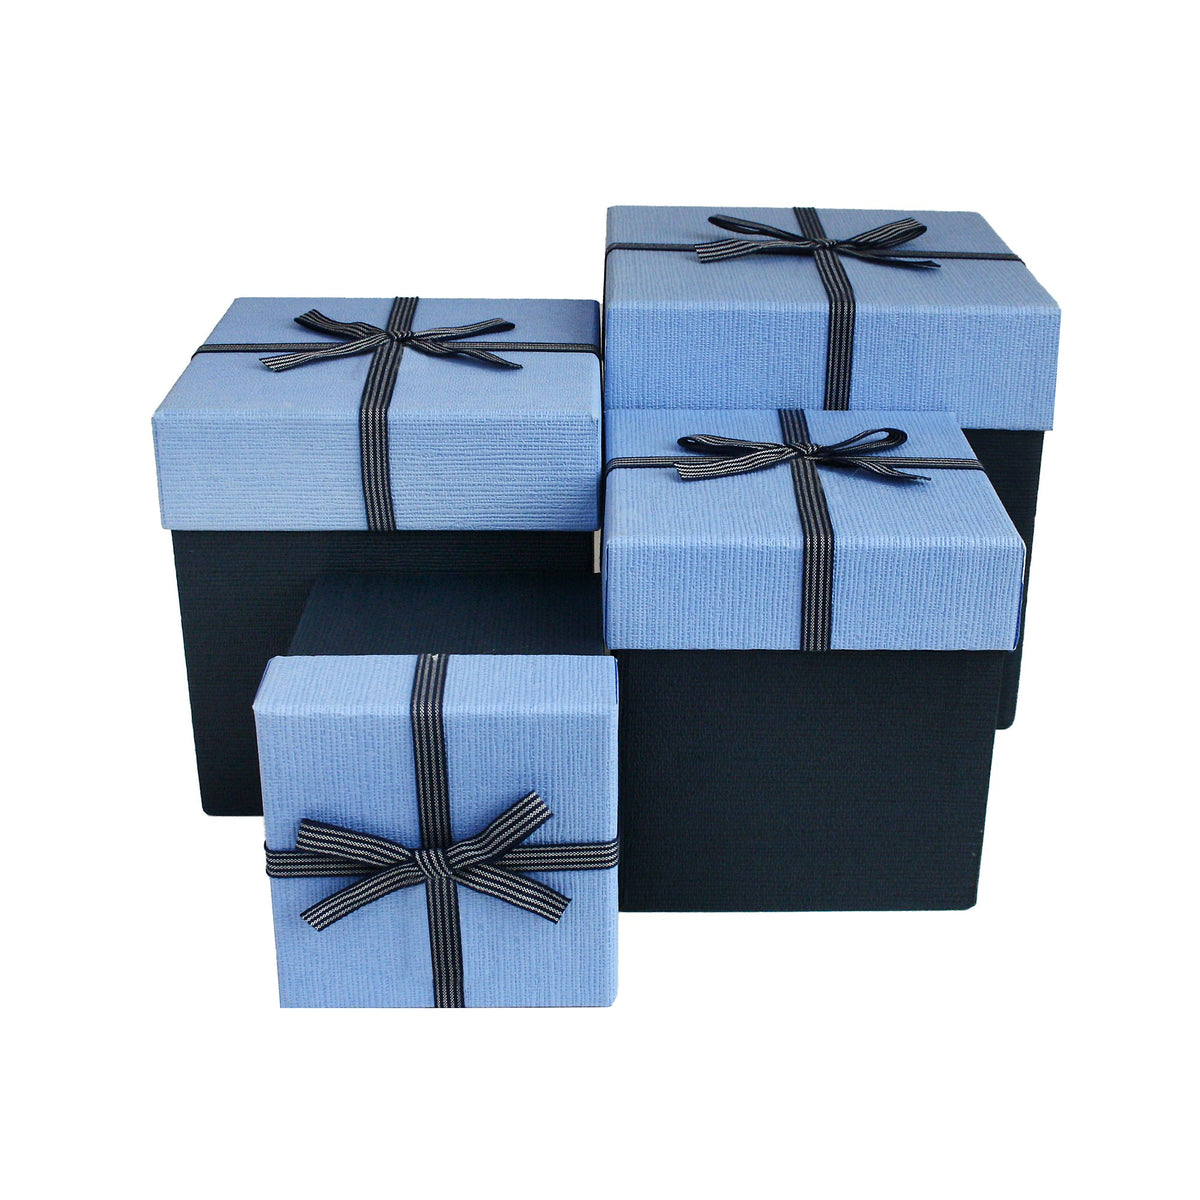 Set of 4 Dark Blue Gift Box with Striped Bow Ribbon